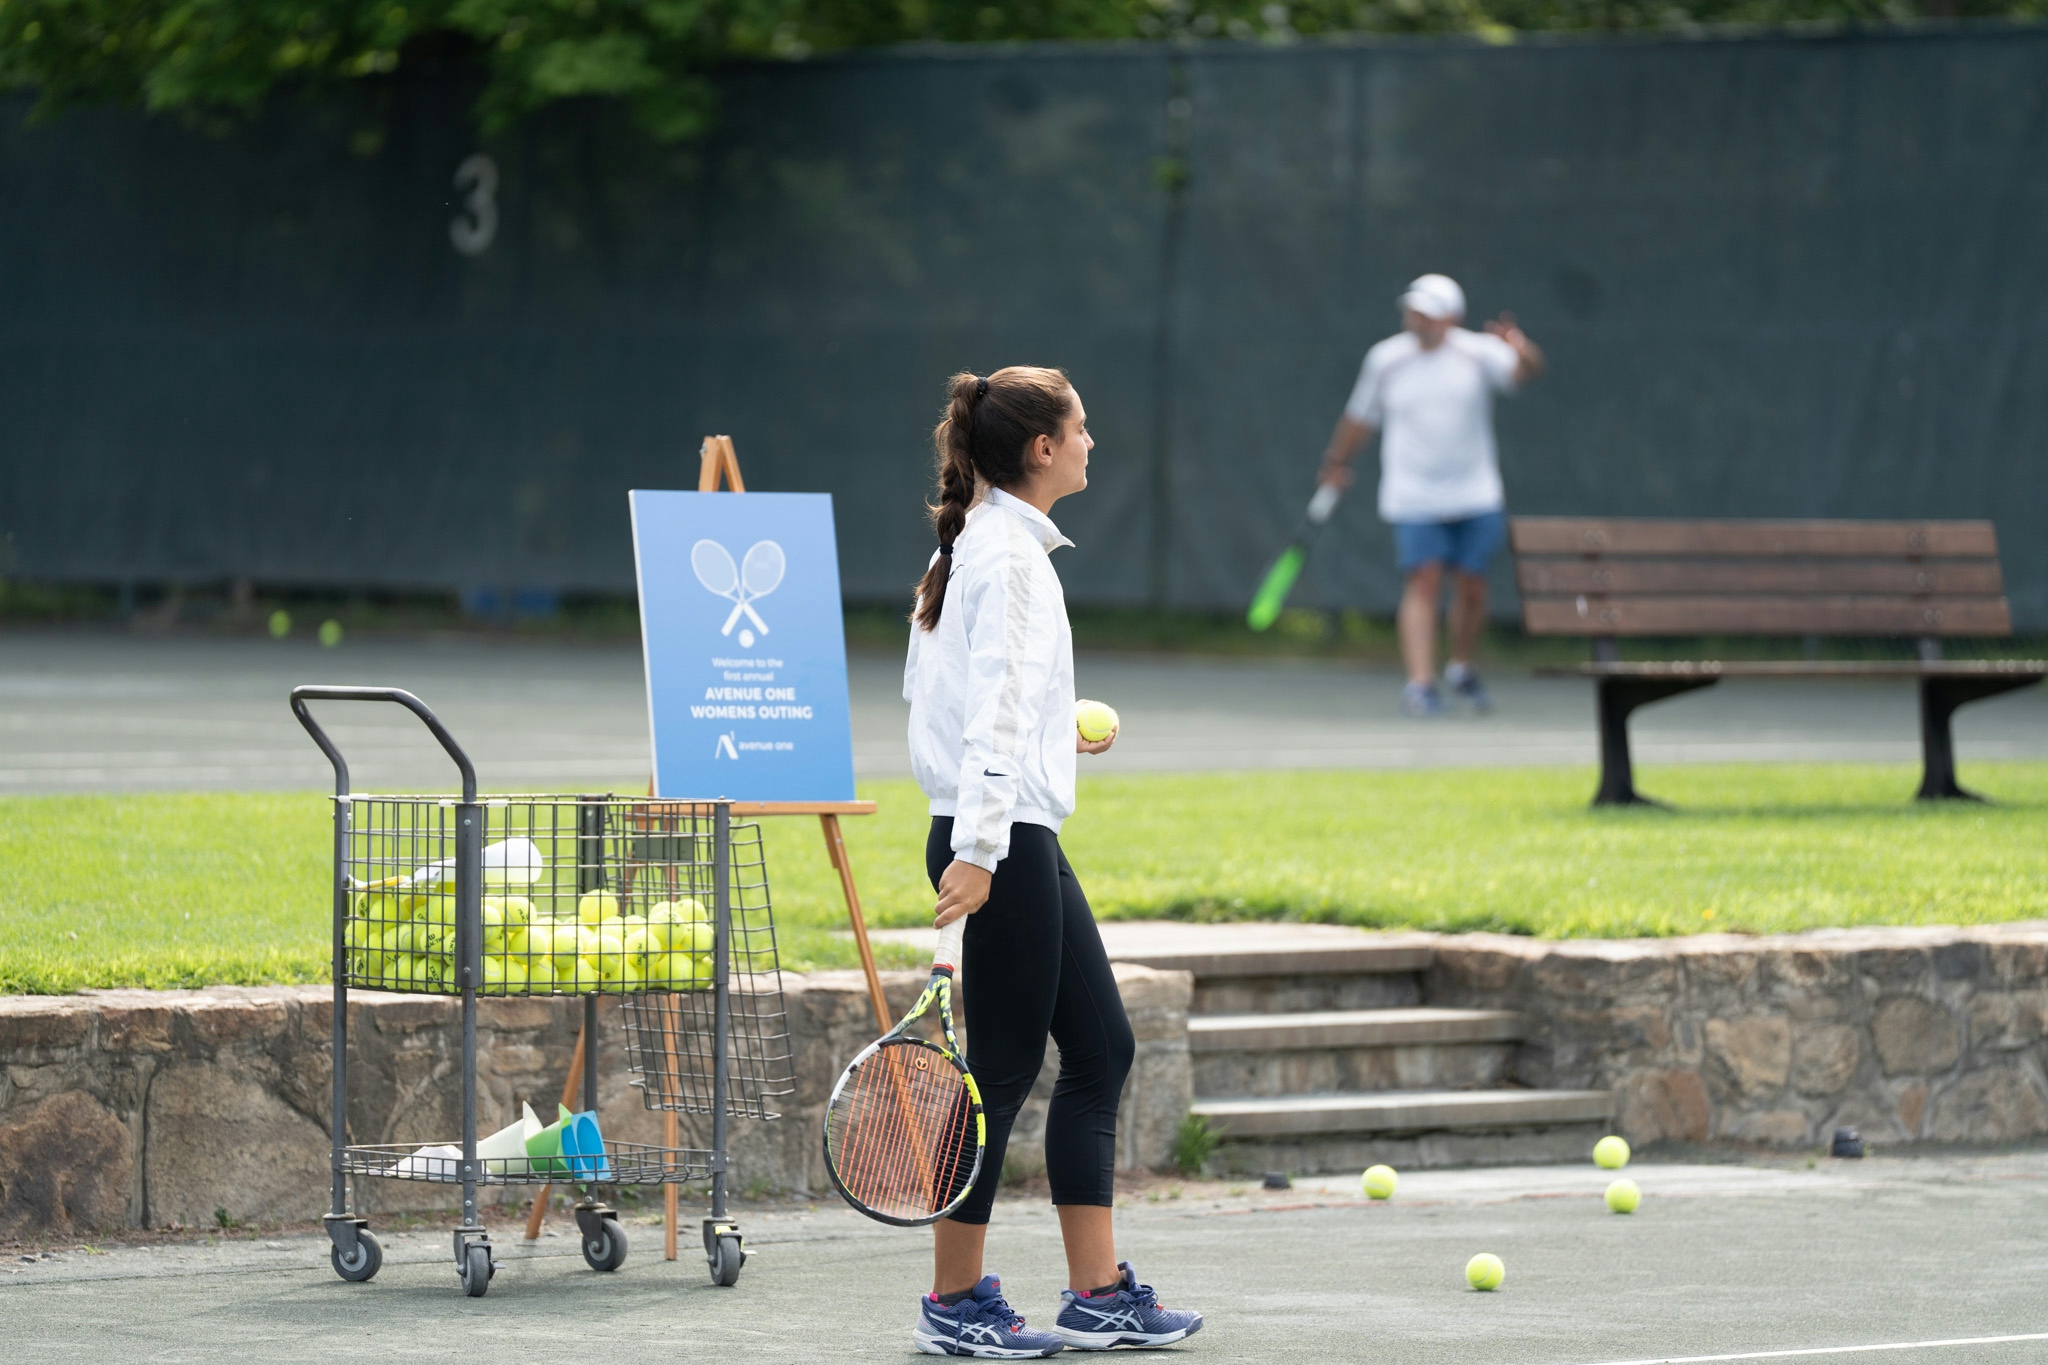 Woman playing tennis at a tennis court